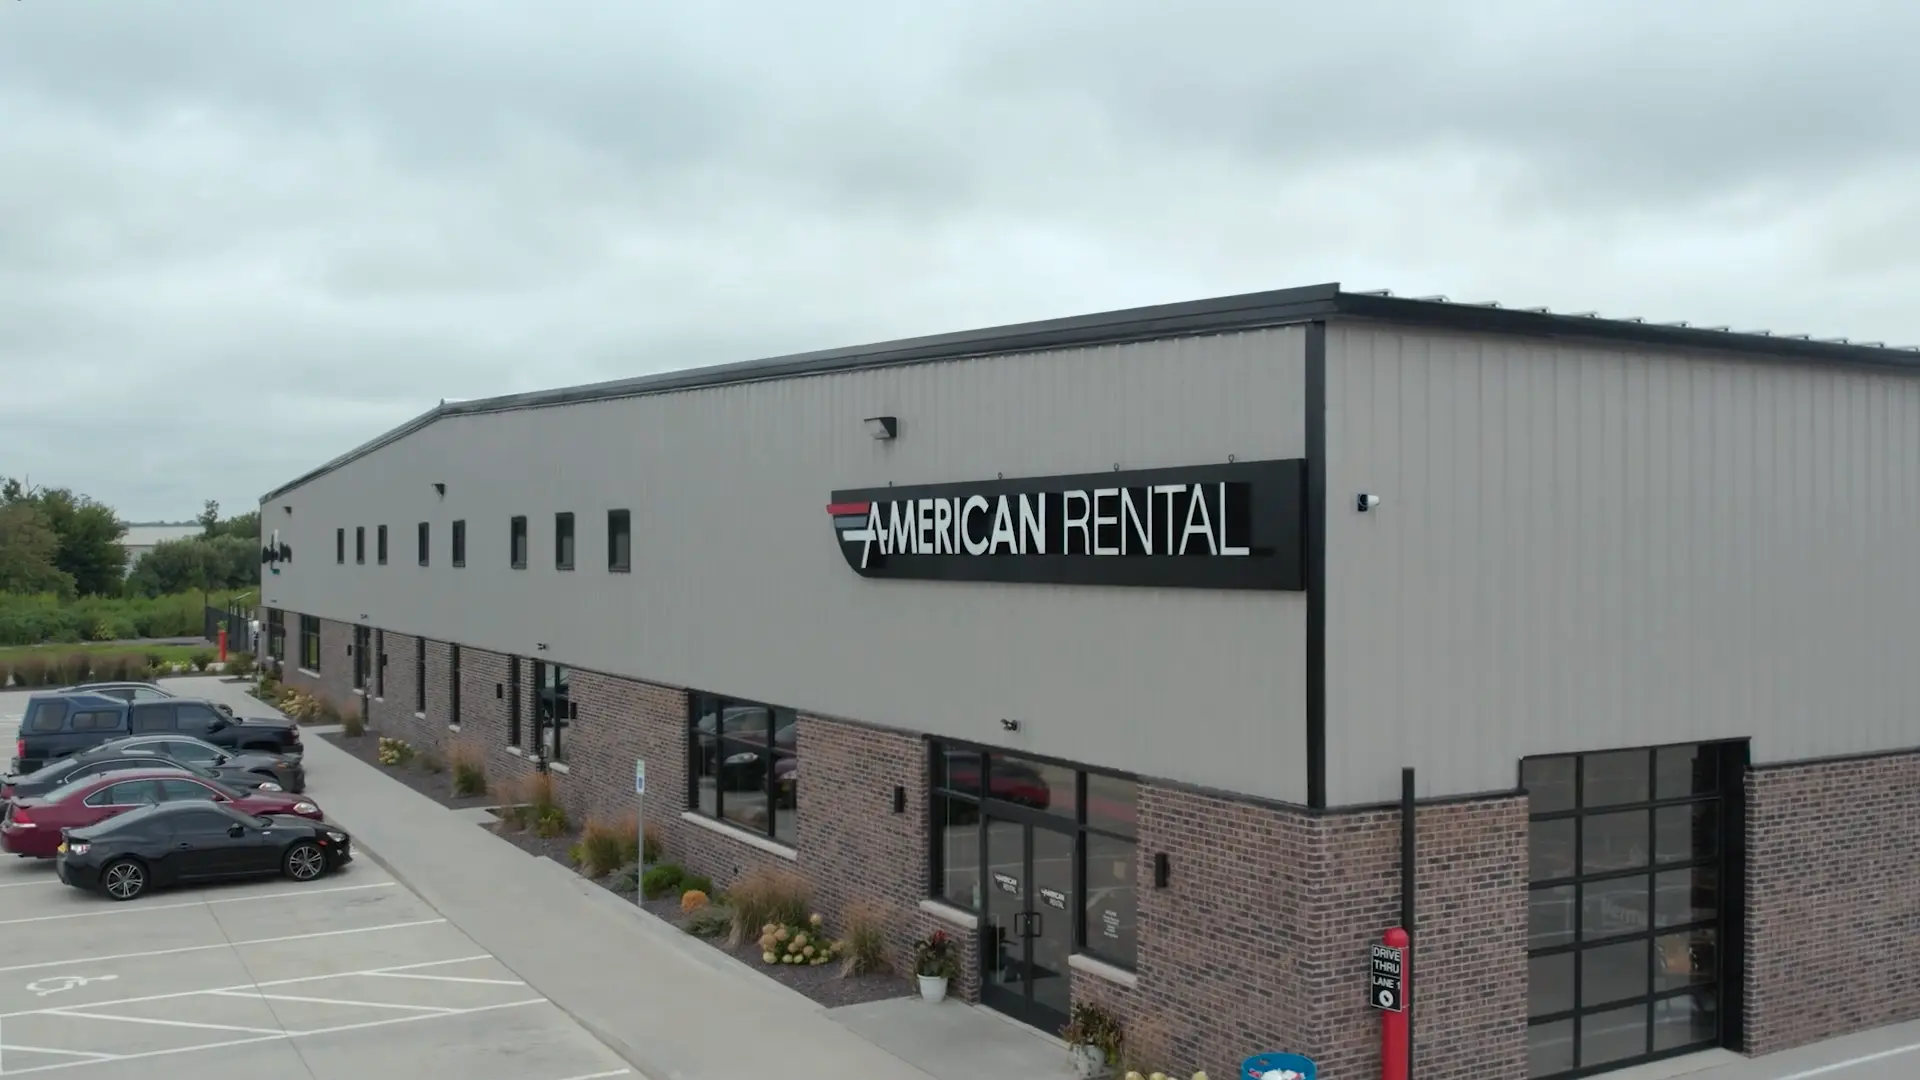 The front of American Rental's building in Morton, IL. Cars are parked outside the front and the first drive-thru sign is visible at the bottom.